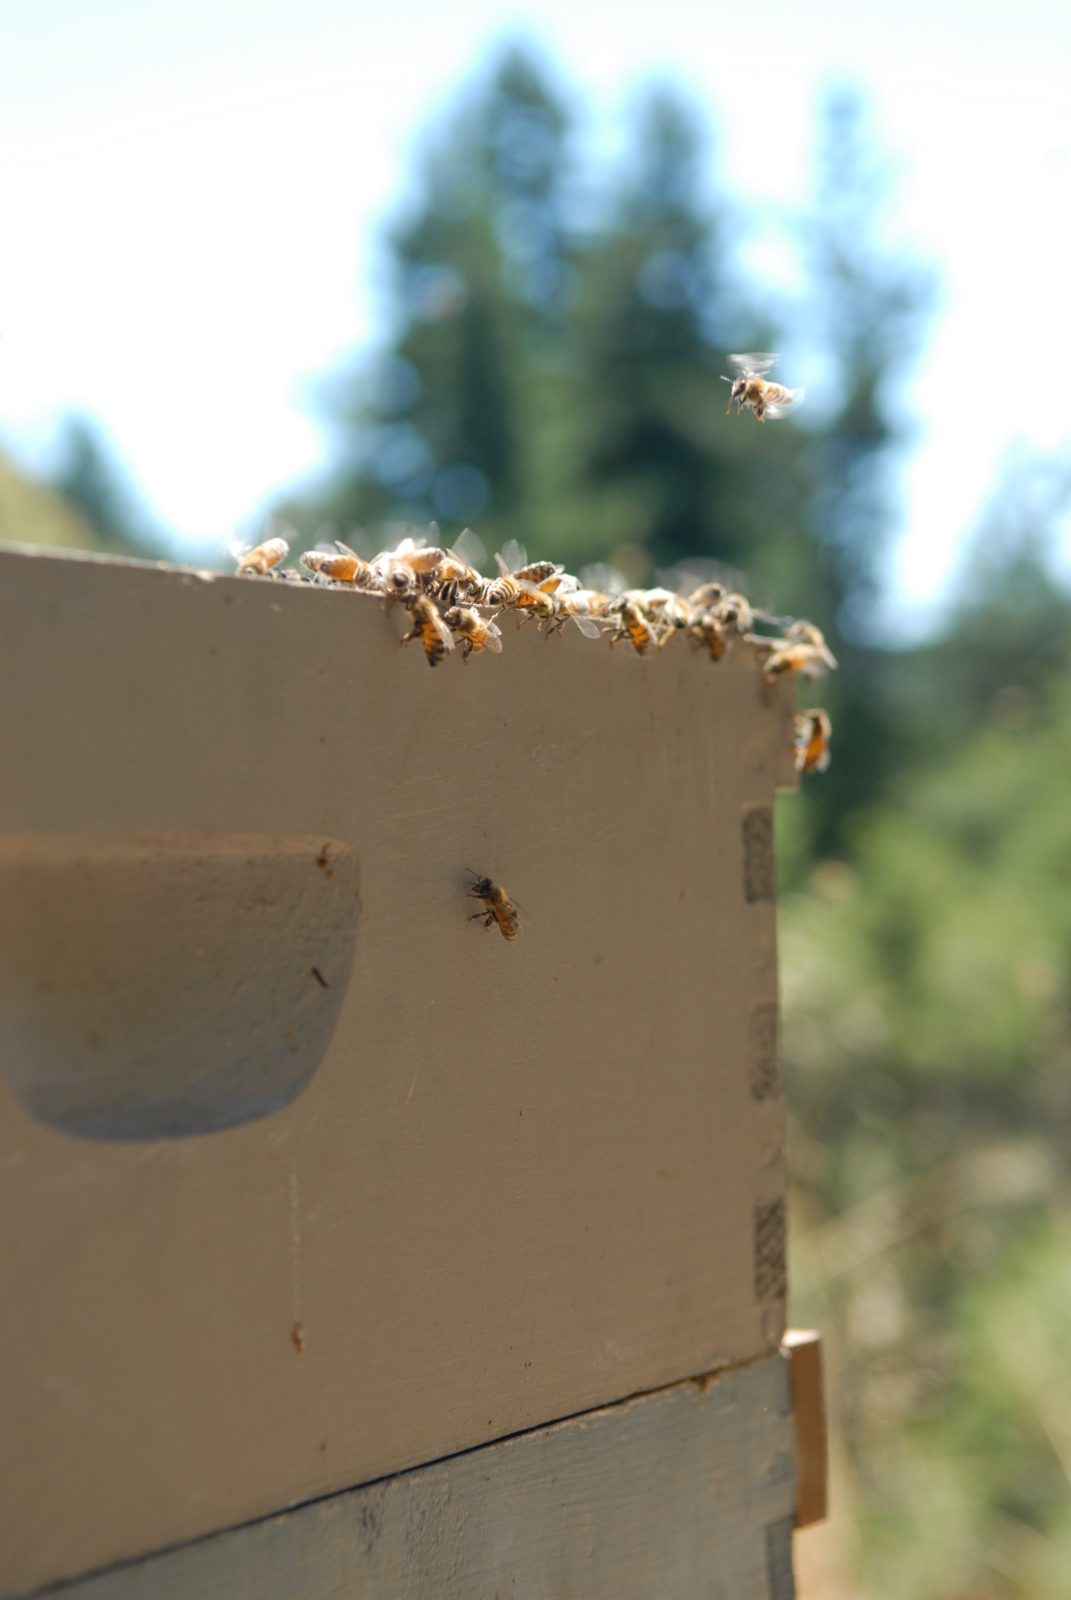 Bees "fanning" themselves during a routine inspection. Photo: Ben Eichorn